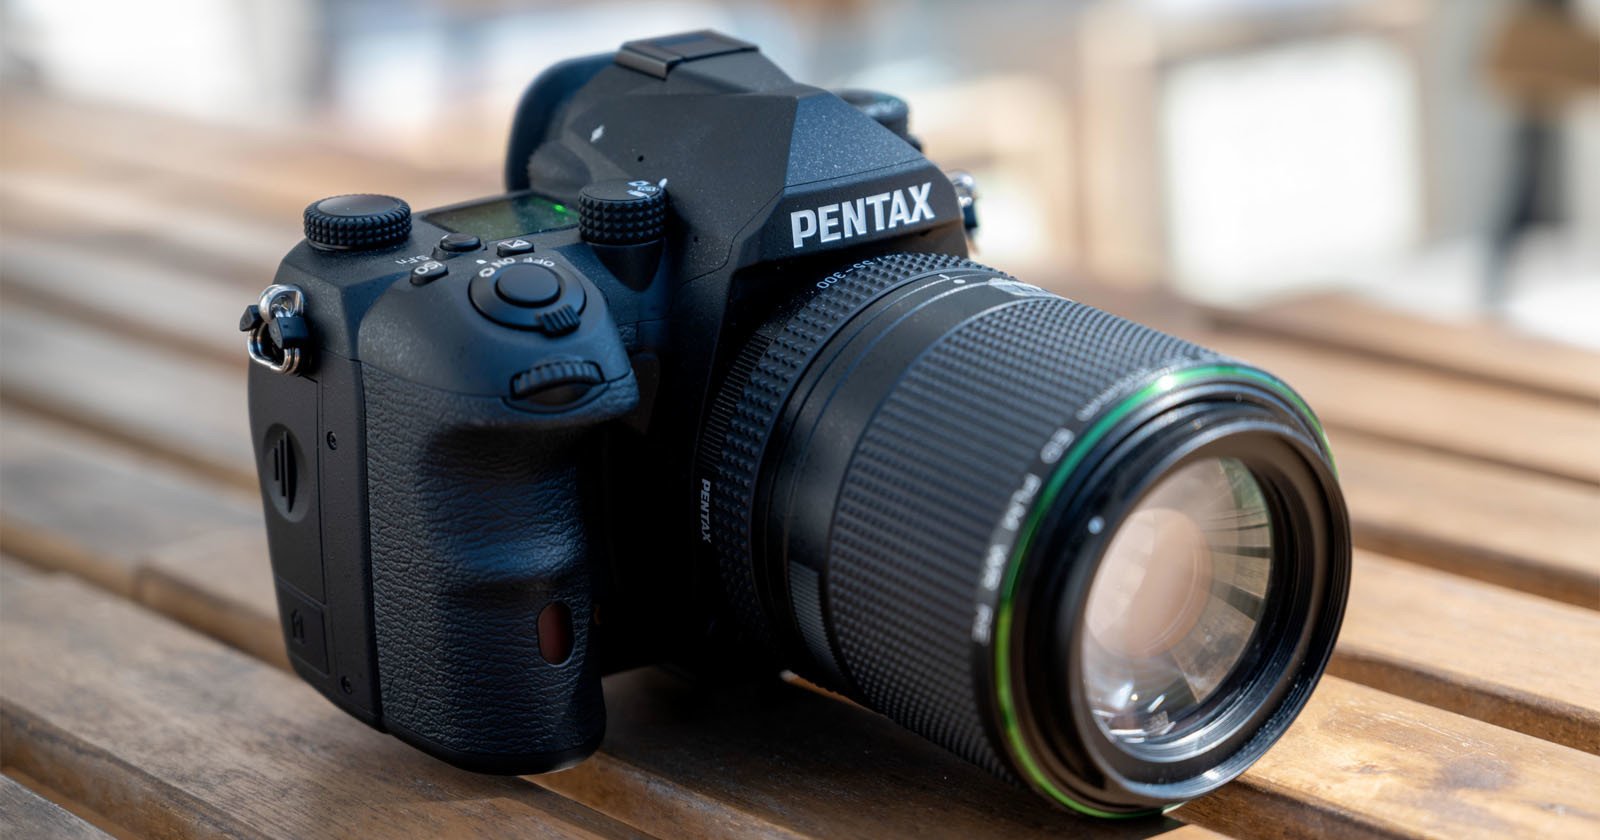  pentax may have lucked out nikon canon 